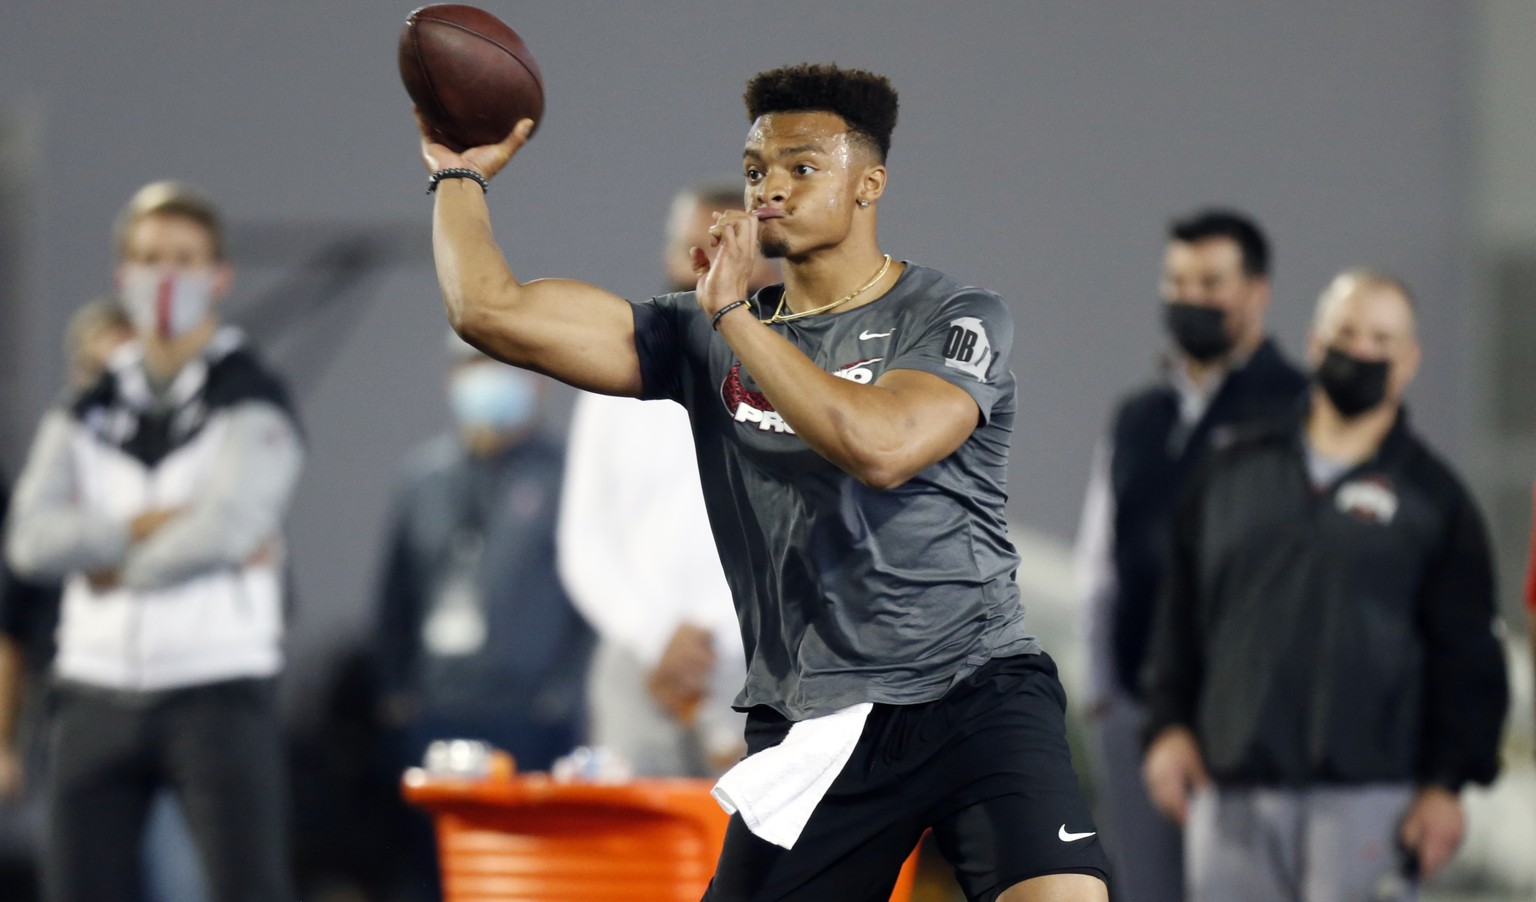 Quarterback Justin Fields throws as part of a drill during an NFL Pro Day at Ohio State University, Tuesday, March 30, 2021, in Columbus, Ohio. (AP Photo/Paul Vernon)